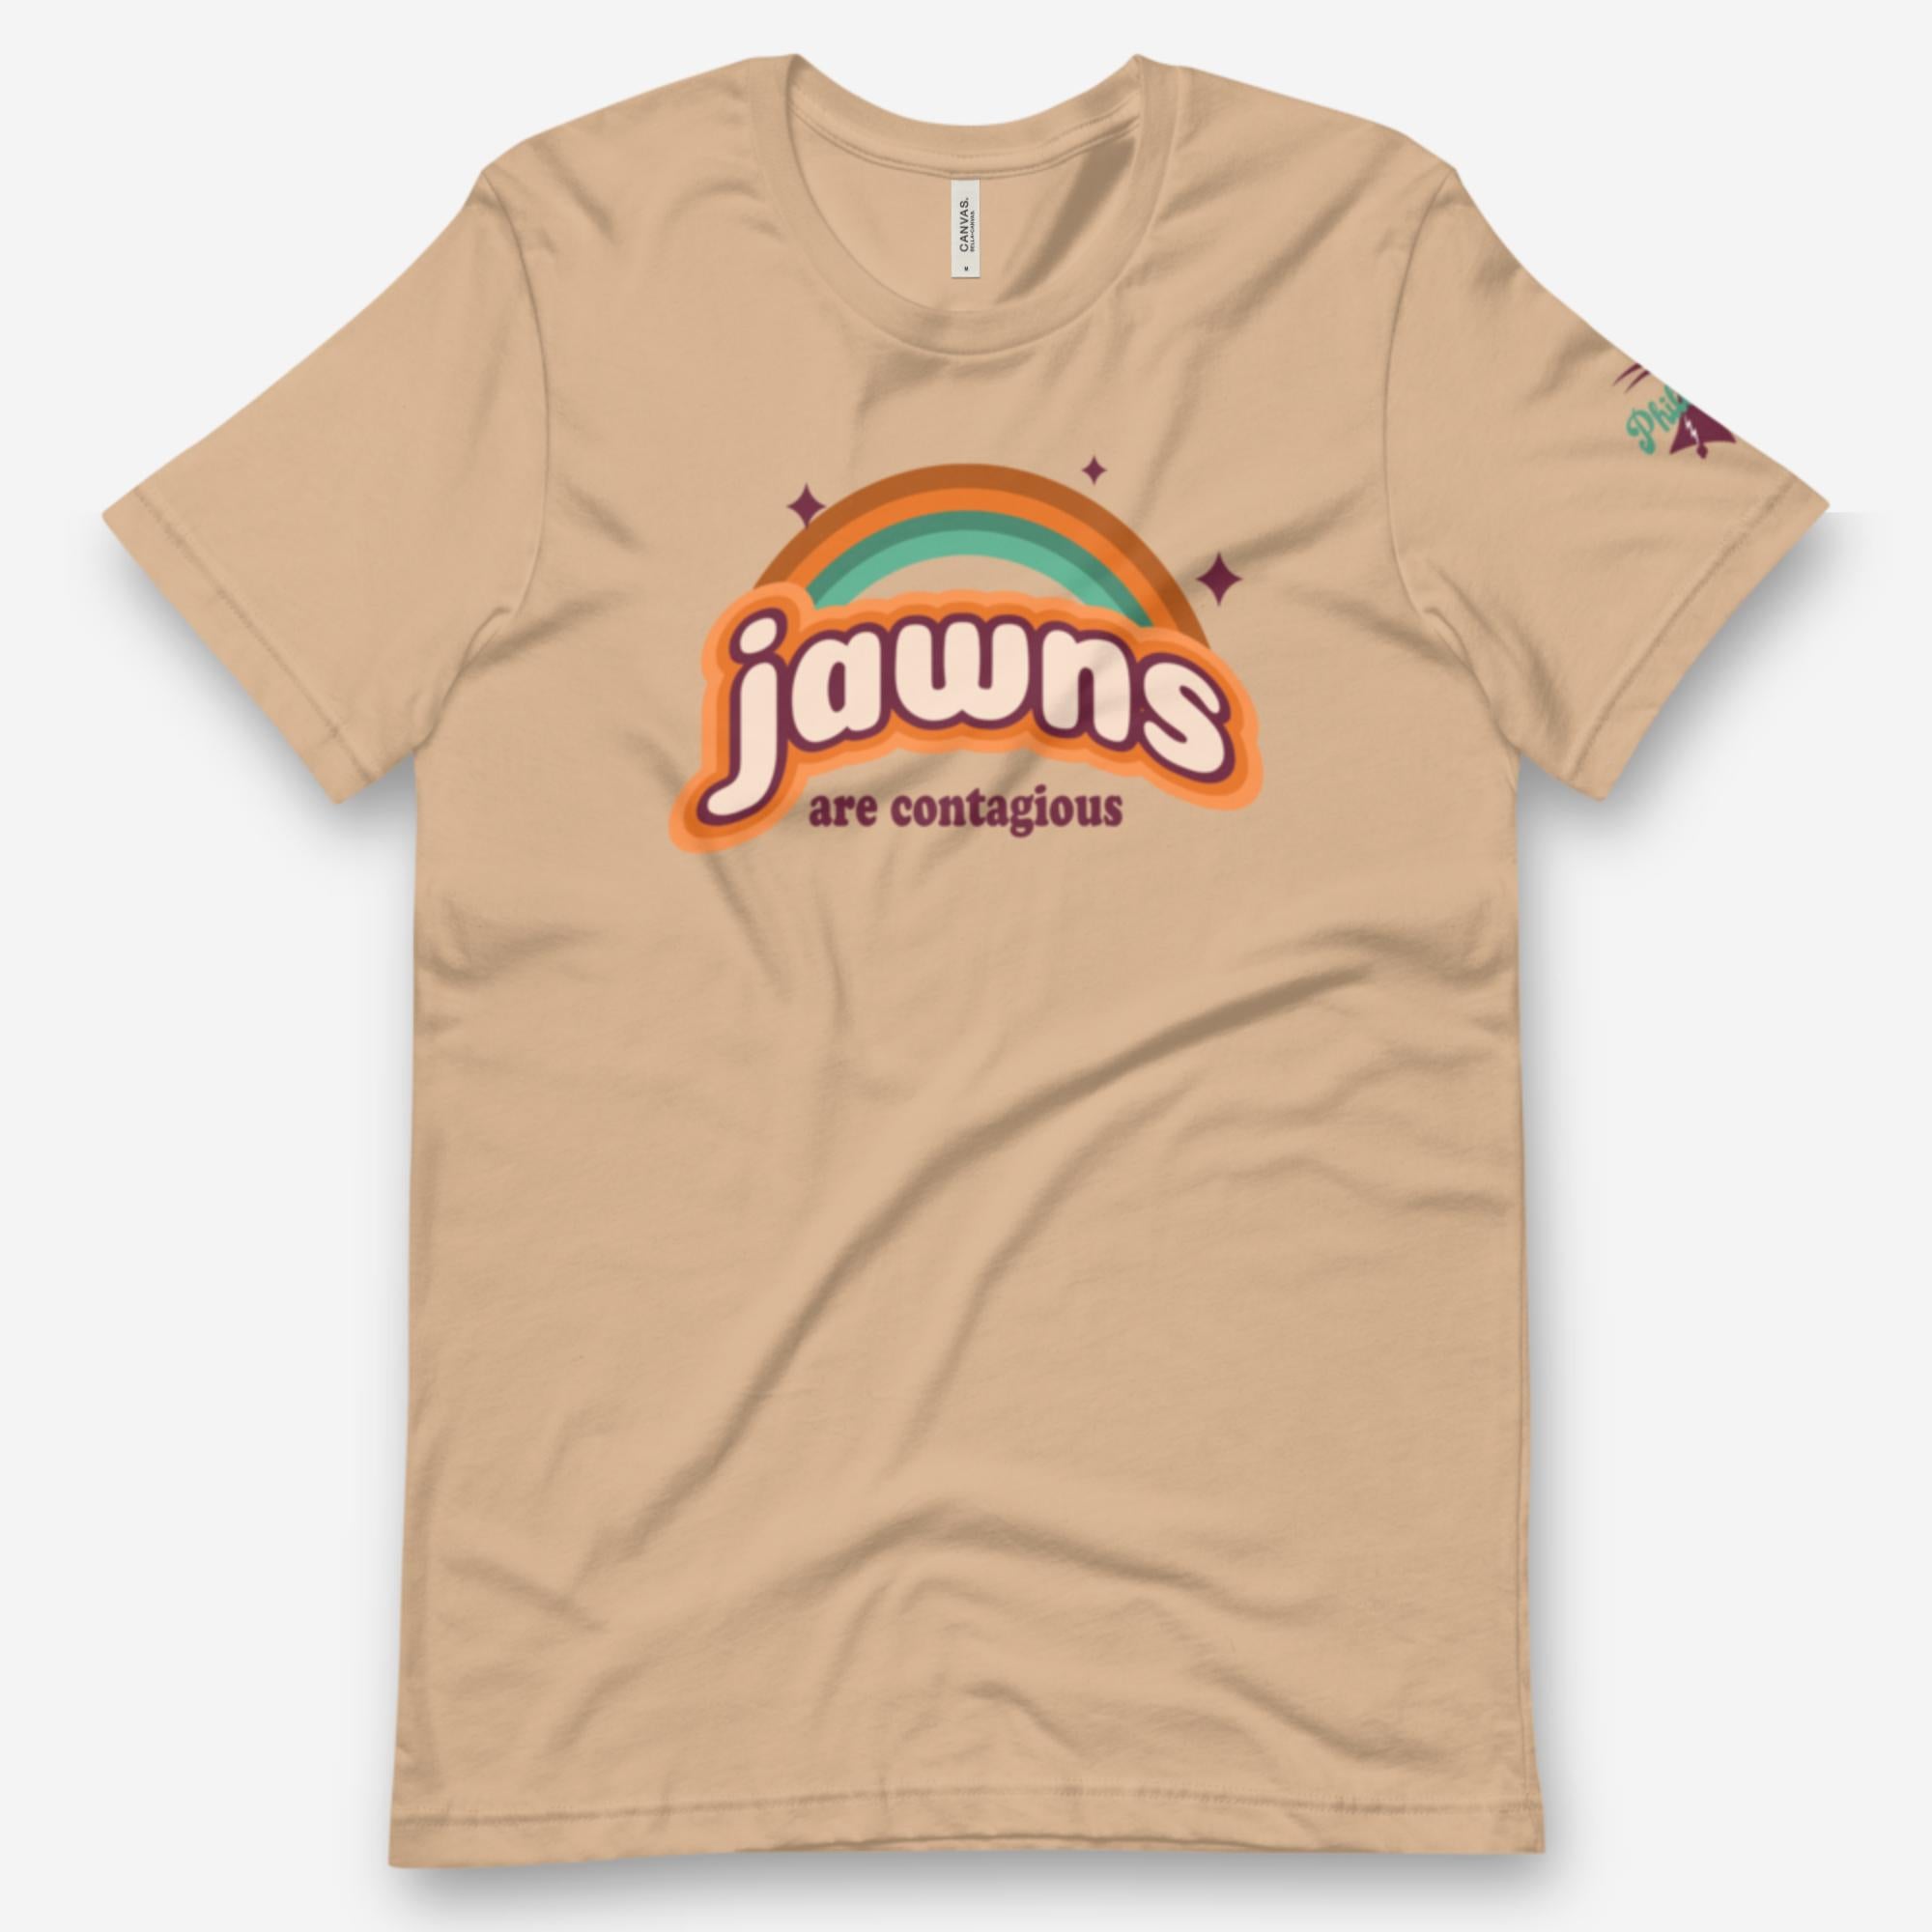 "Jawns Are Contagious" Tee